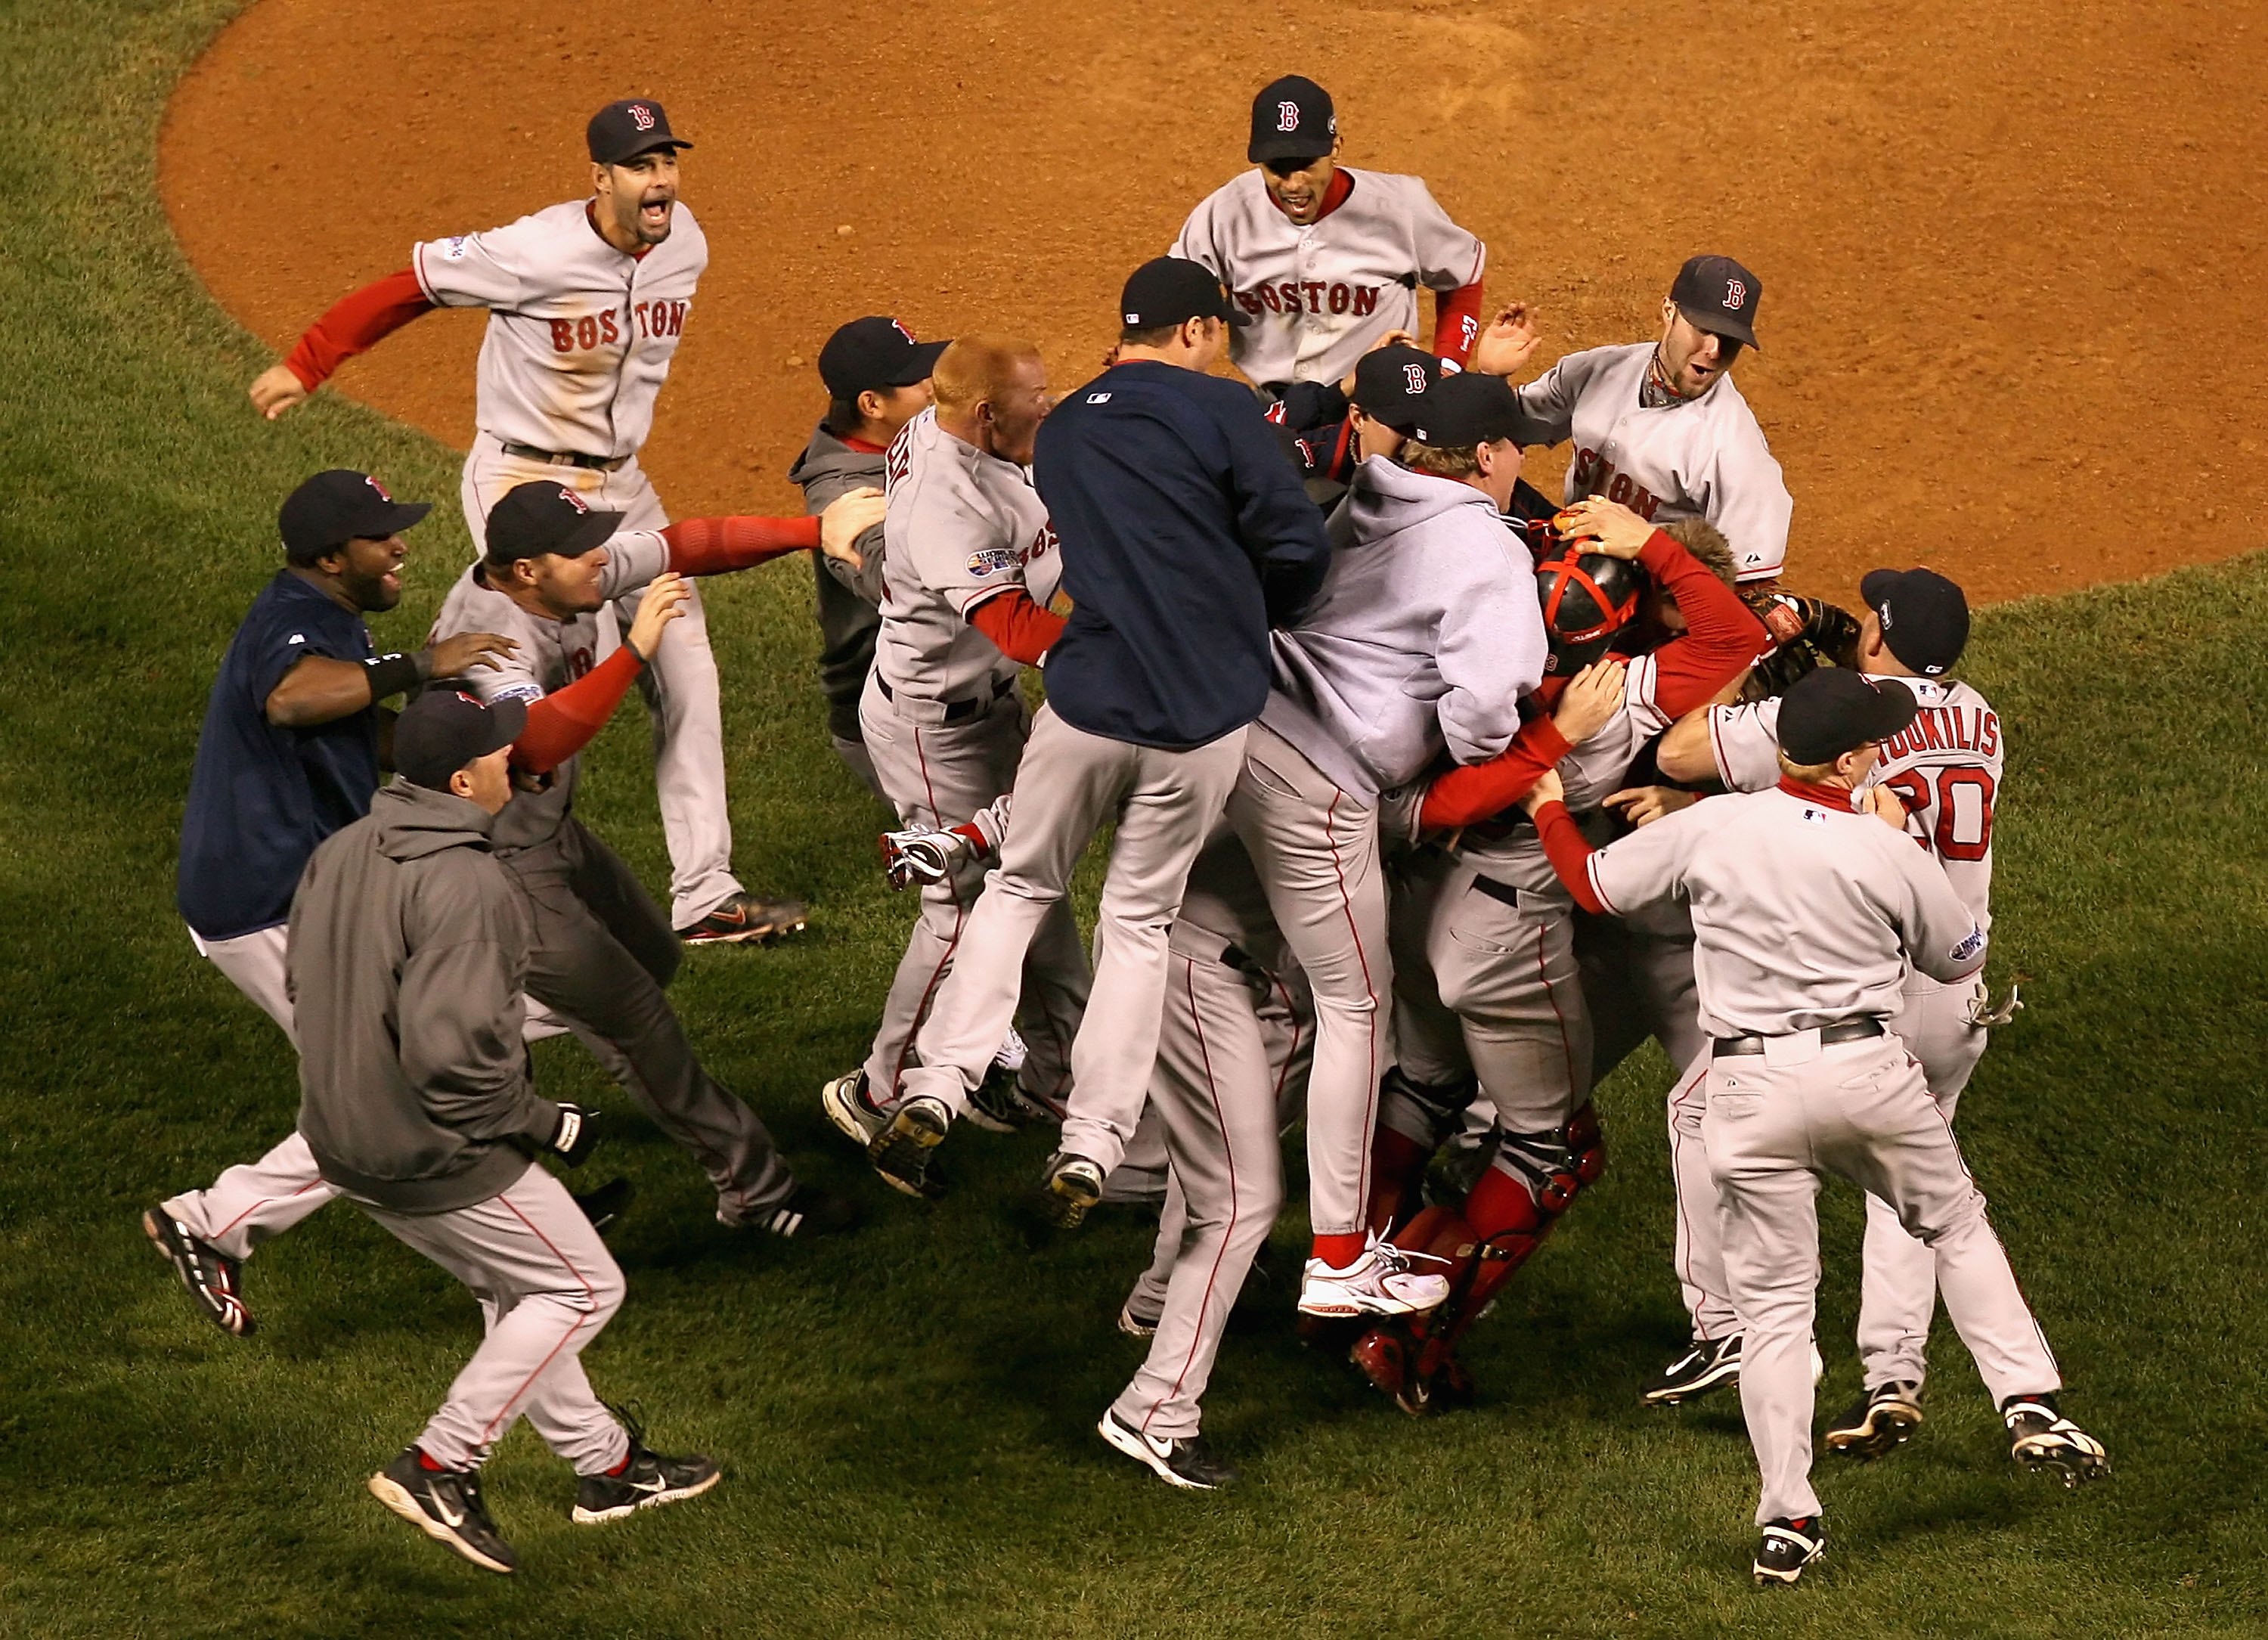 DENVER - OCTOBER 28:  The Boston Red Sox celebrate after defeating the Colorado Rockies in Game Four of the 2007 World Series at Coors Field on October 28, 2007 in Denver, Colorado  The Red Sox defeated the Rockies 4-3 and won the World Series 4-0.  (Phot